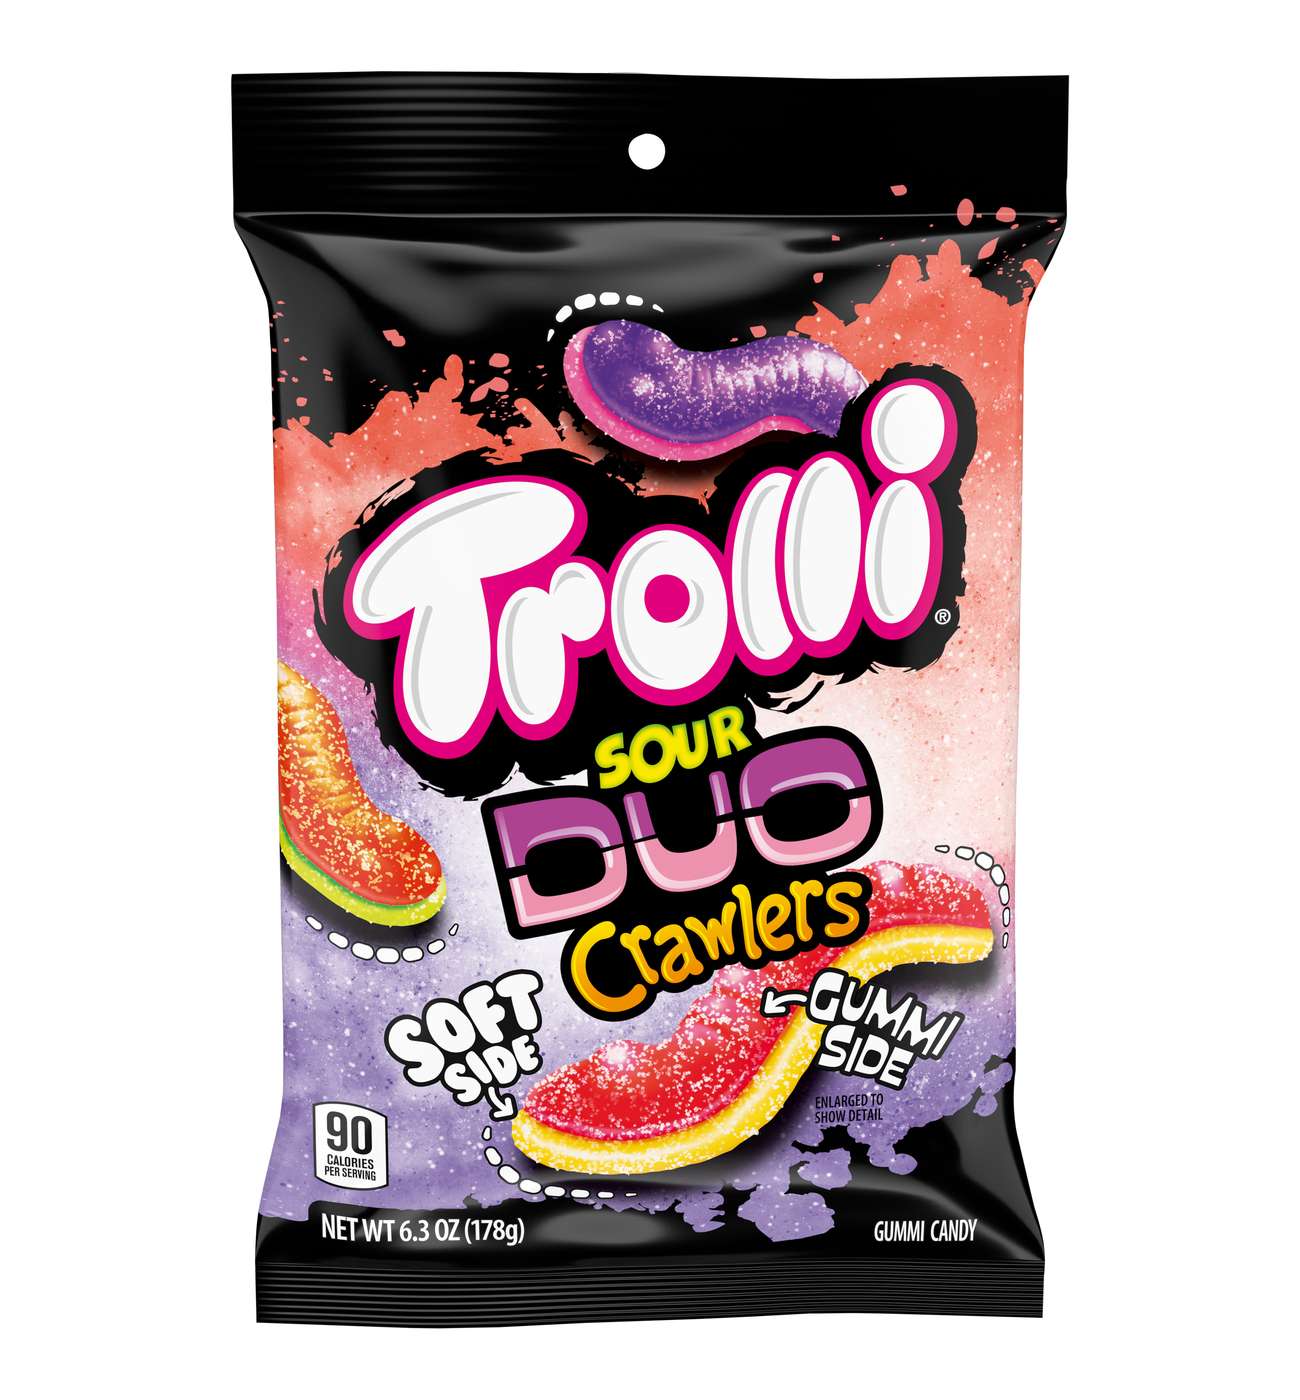 Trolli Sour Duo Crawlers Candy; image 1 of 2